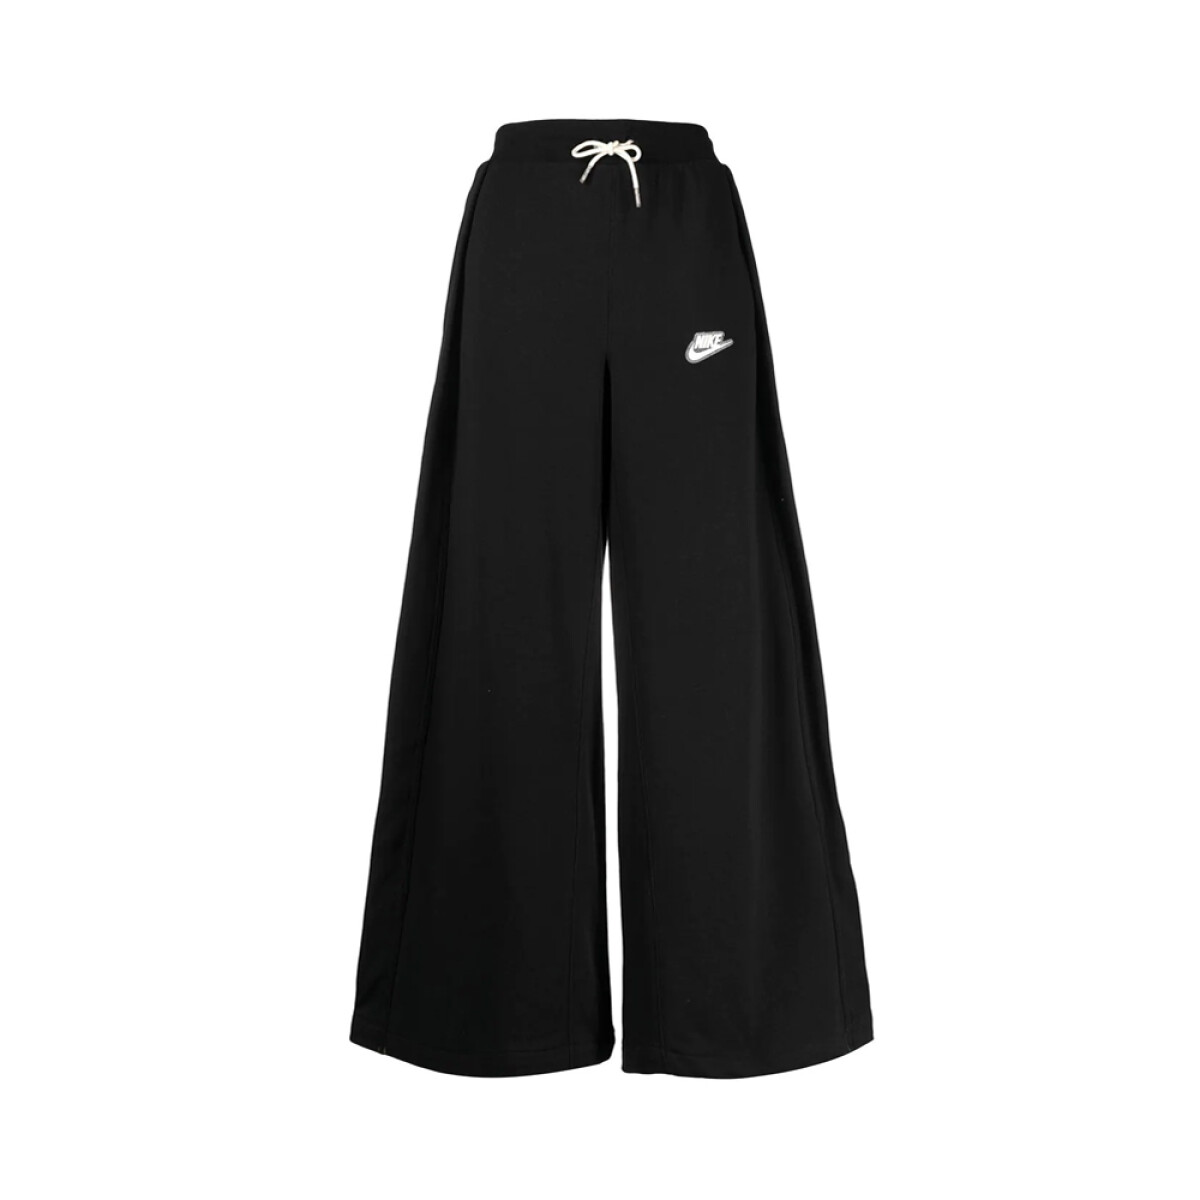 W NSW PANT FT EARTH DAY - Black 